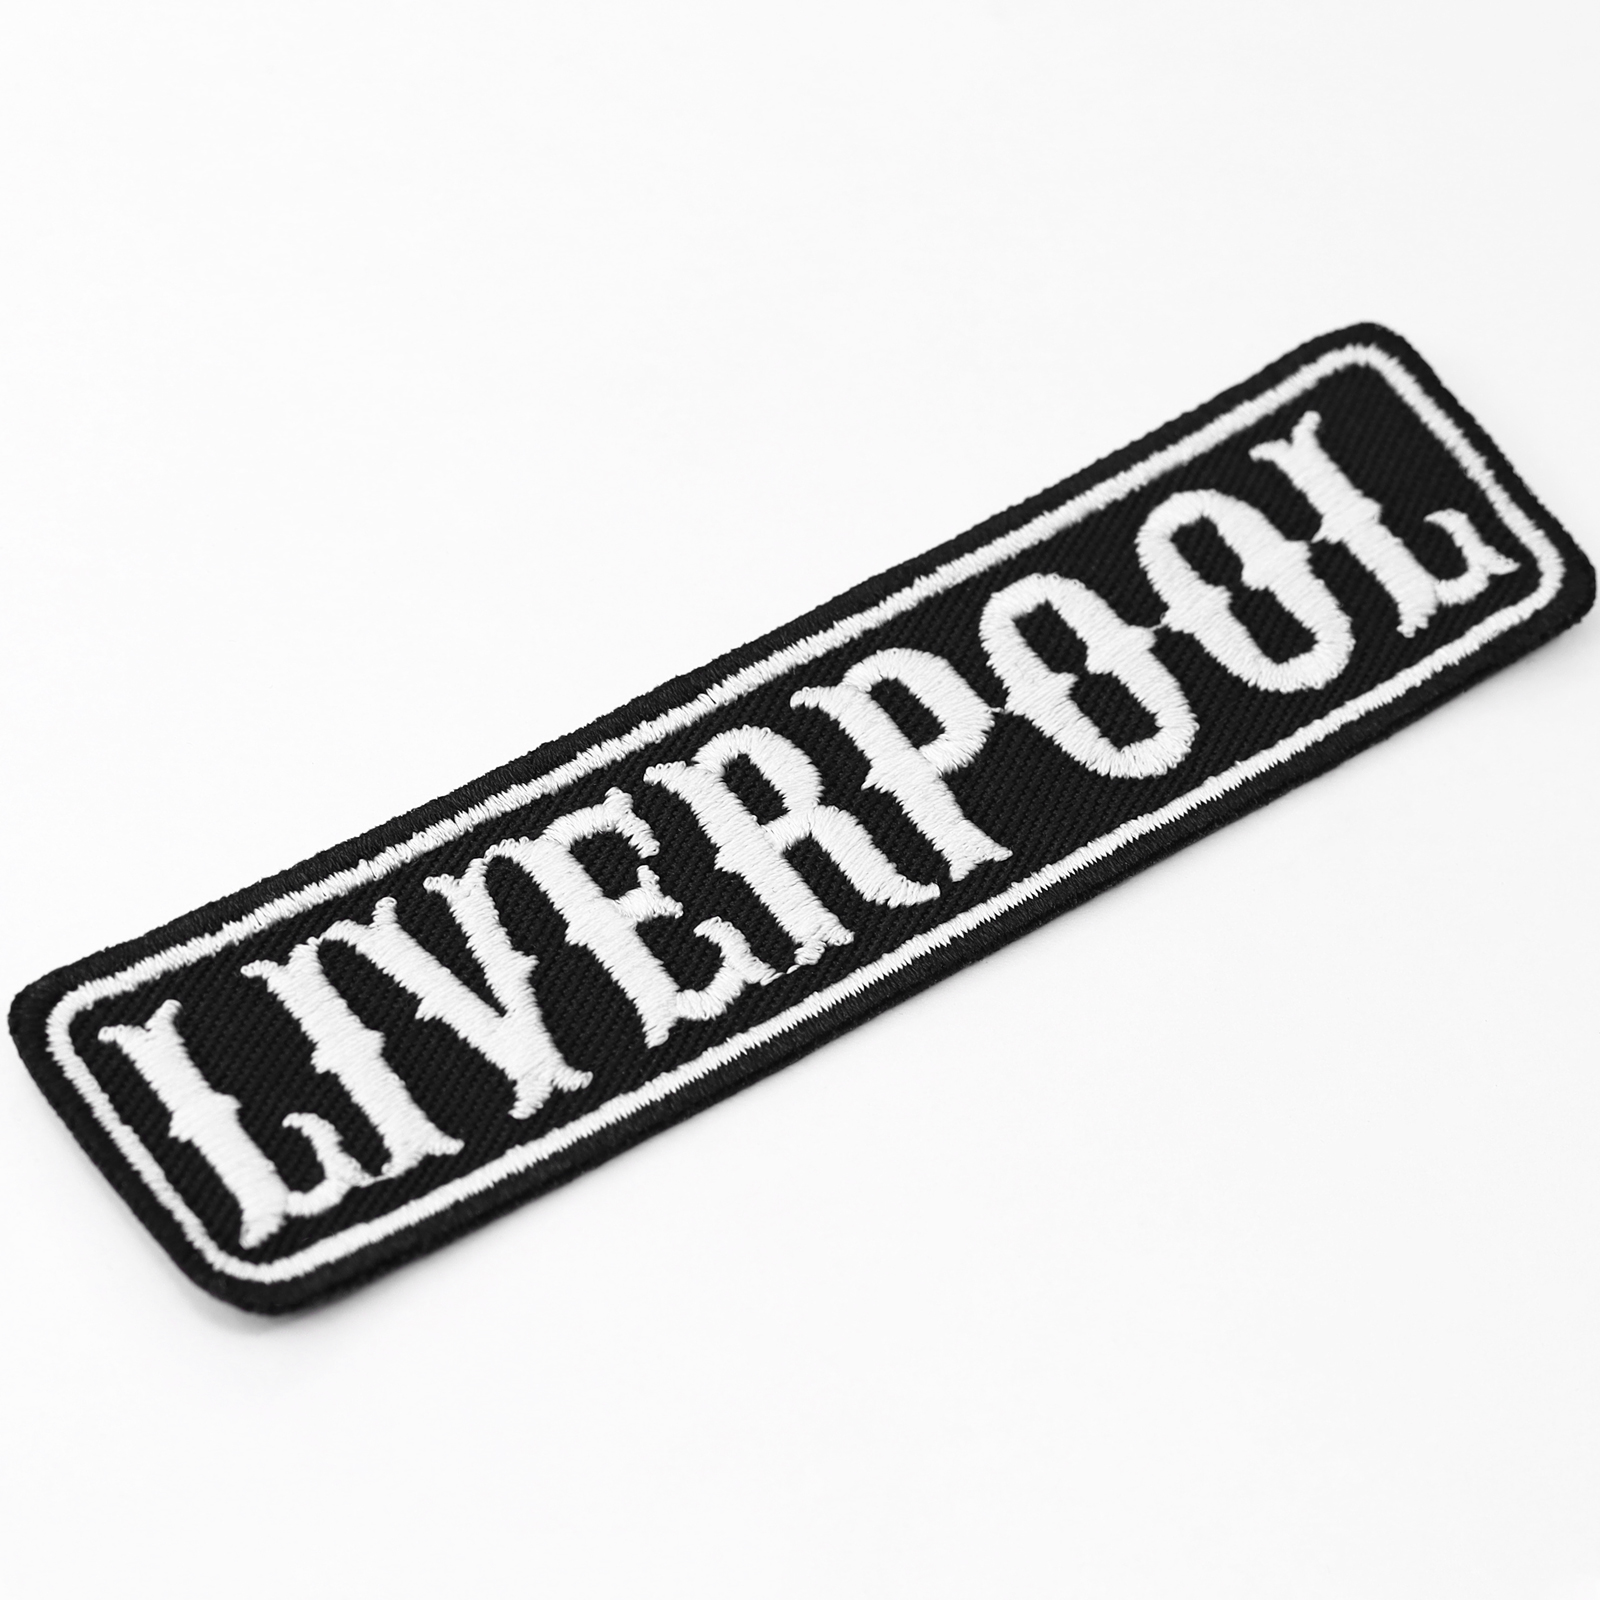 Liverpool - Patch